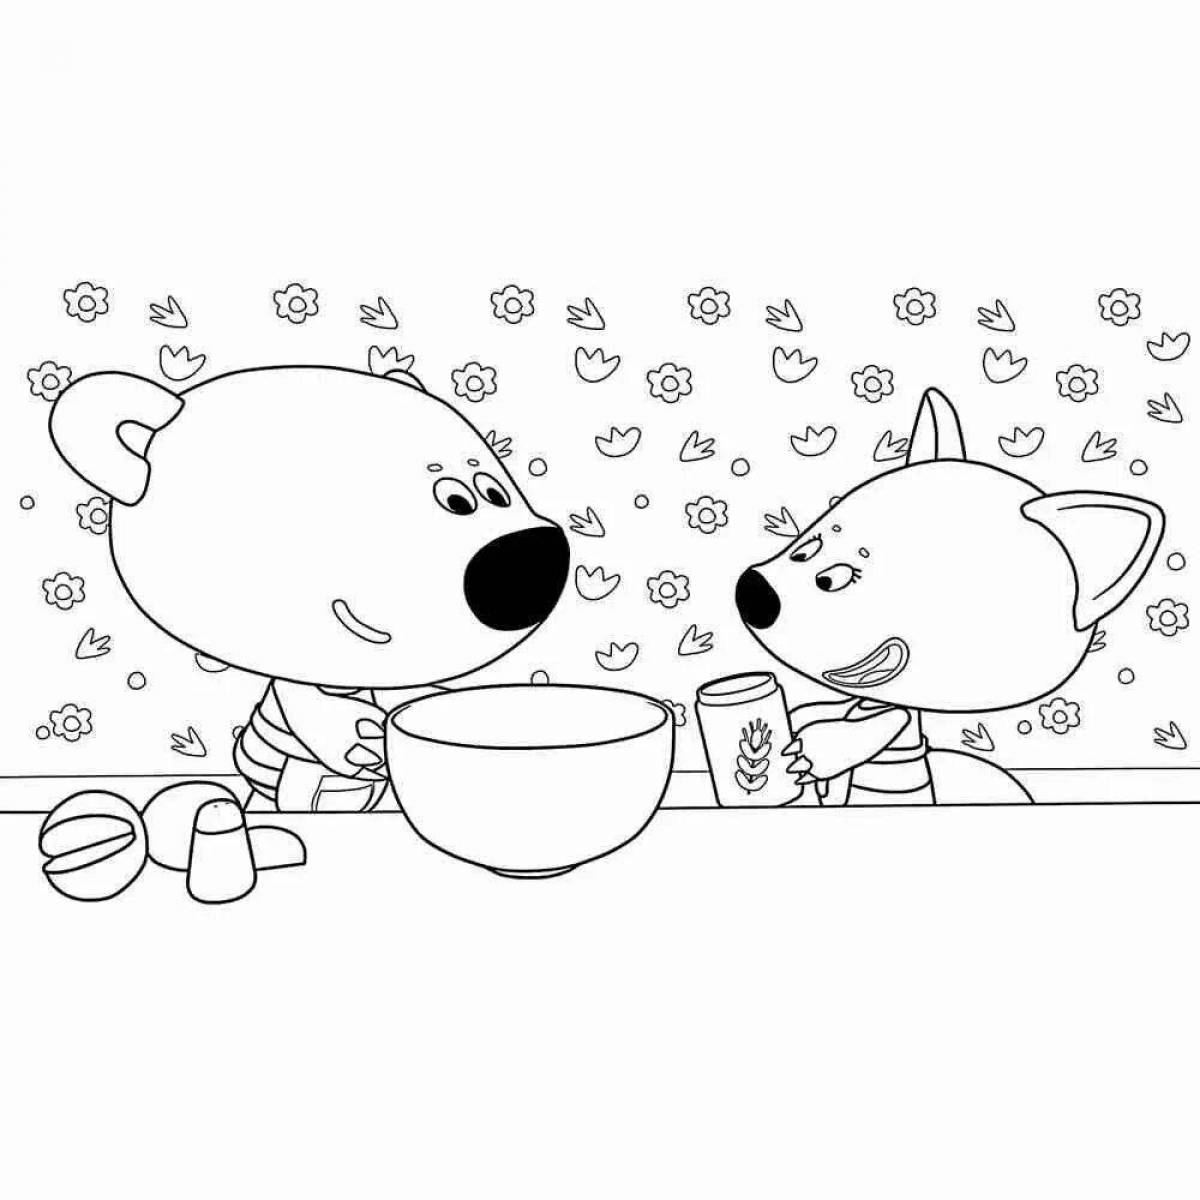 Cute bear coloring pages for girls